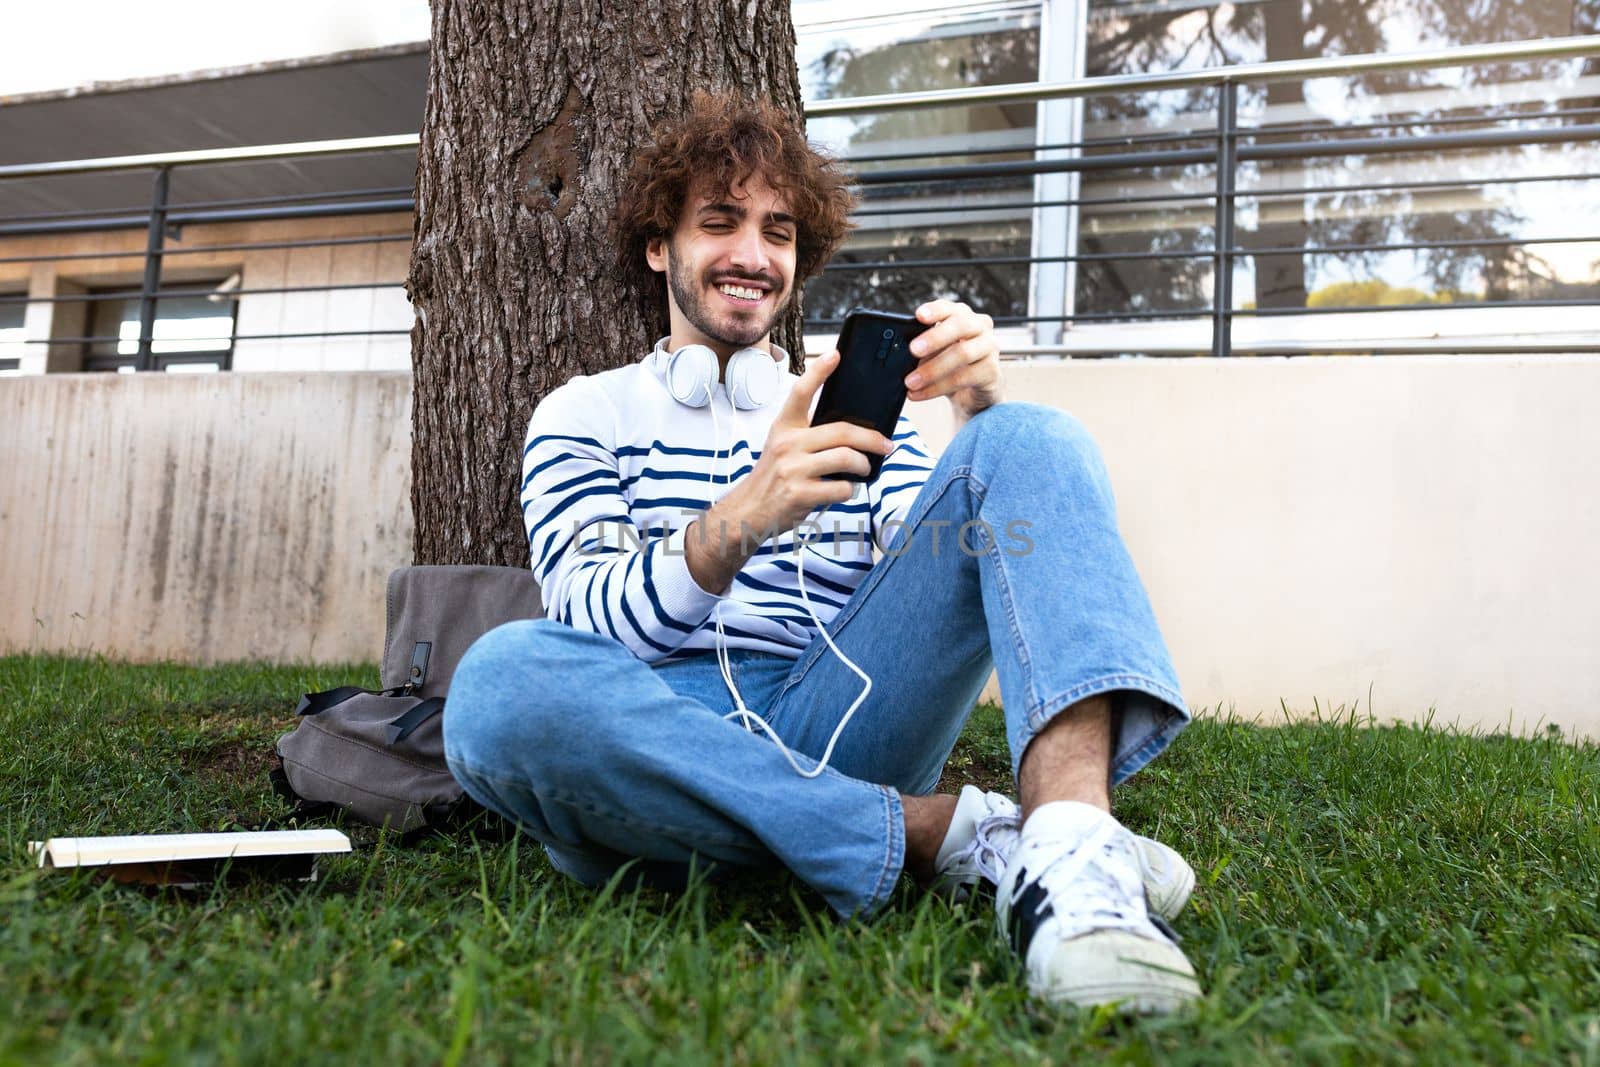 Young man relaxing outdoors using phone in park. Male college student relaxing on campus. Education concept.